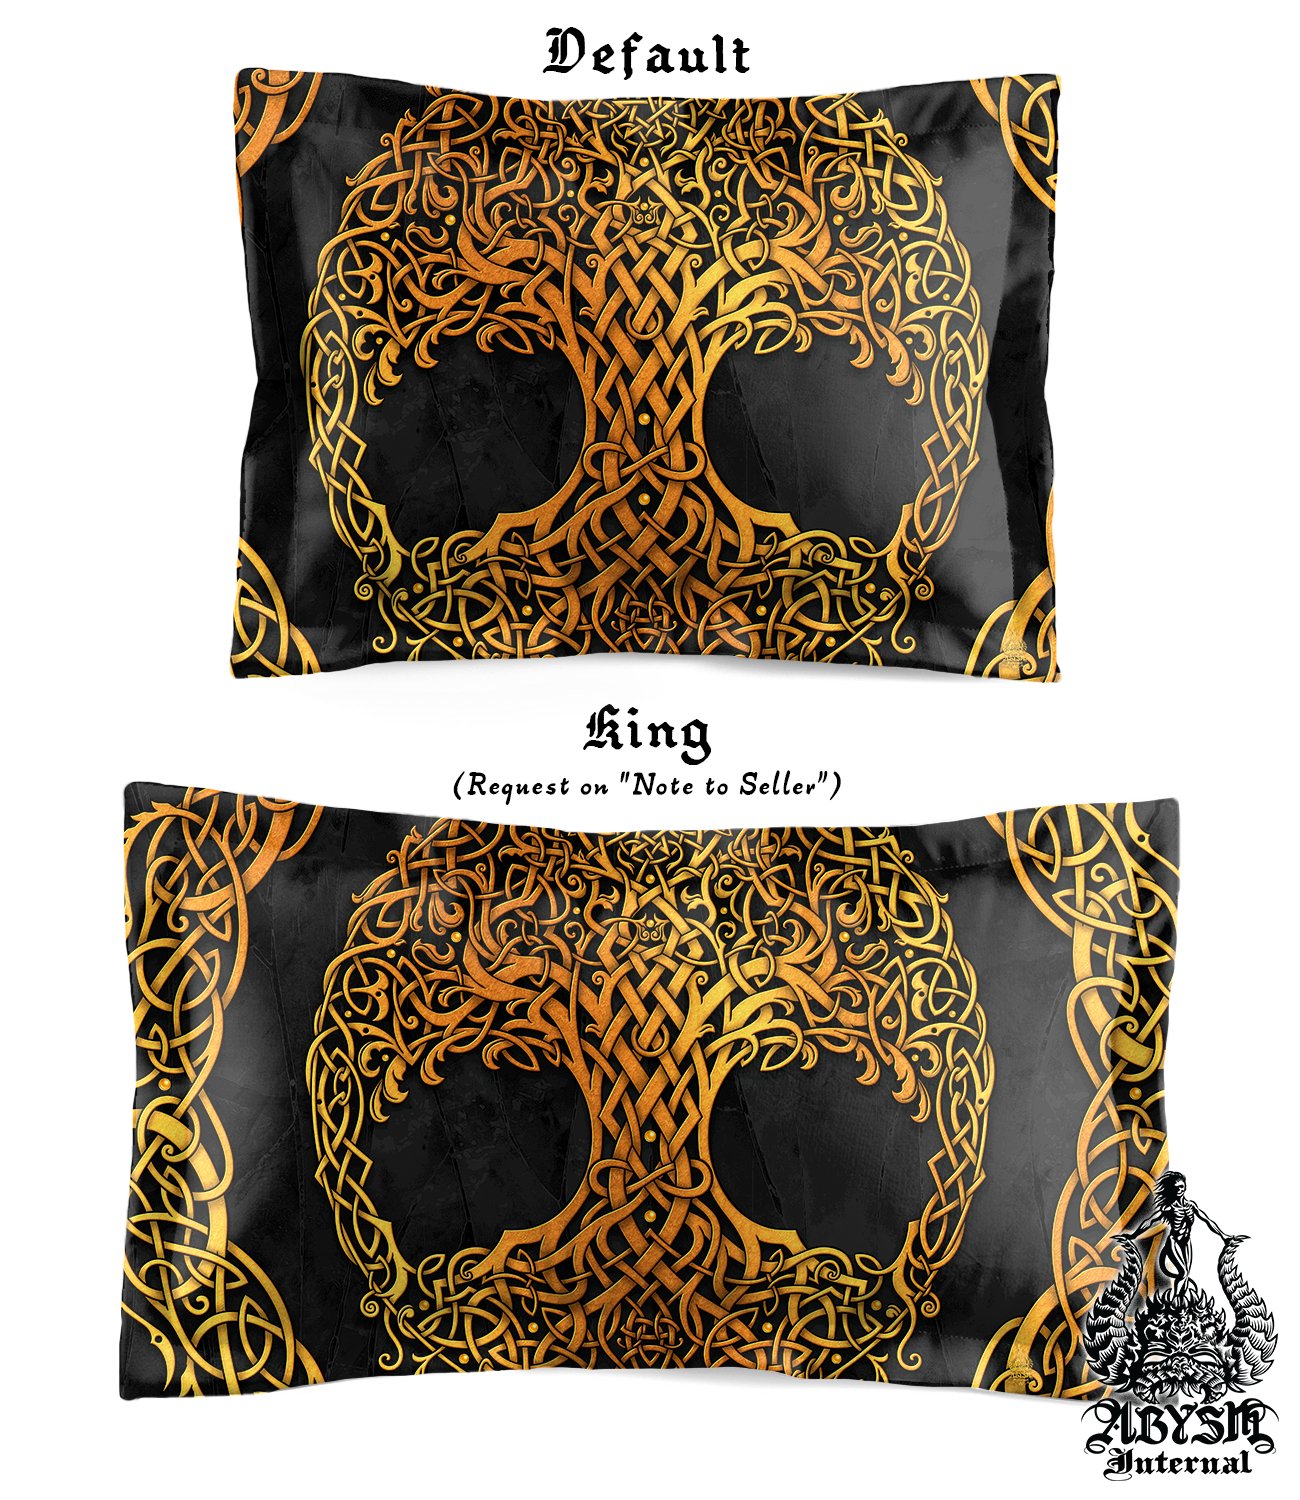 Tree of Life Bed Cover, Indie Bedding Set, Comforter or Duvet, Witchy Bedroom Decor King, Queen & Twin Size - Celtic, Gold and 3 Colors: Green, Purple, Black - Abysm Internal